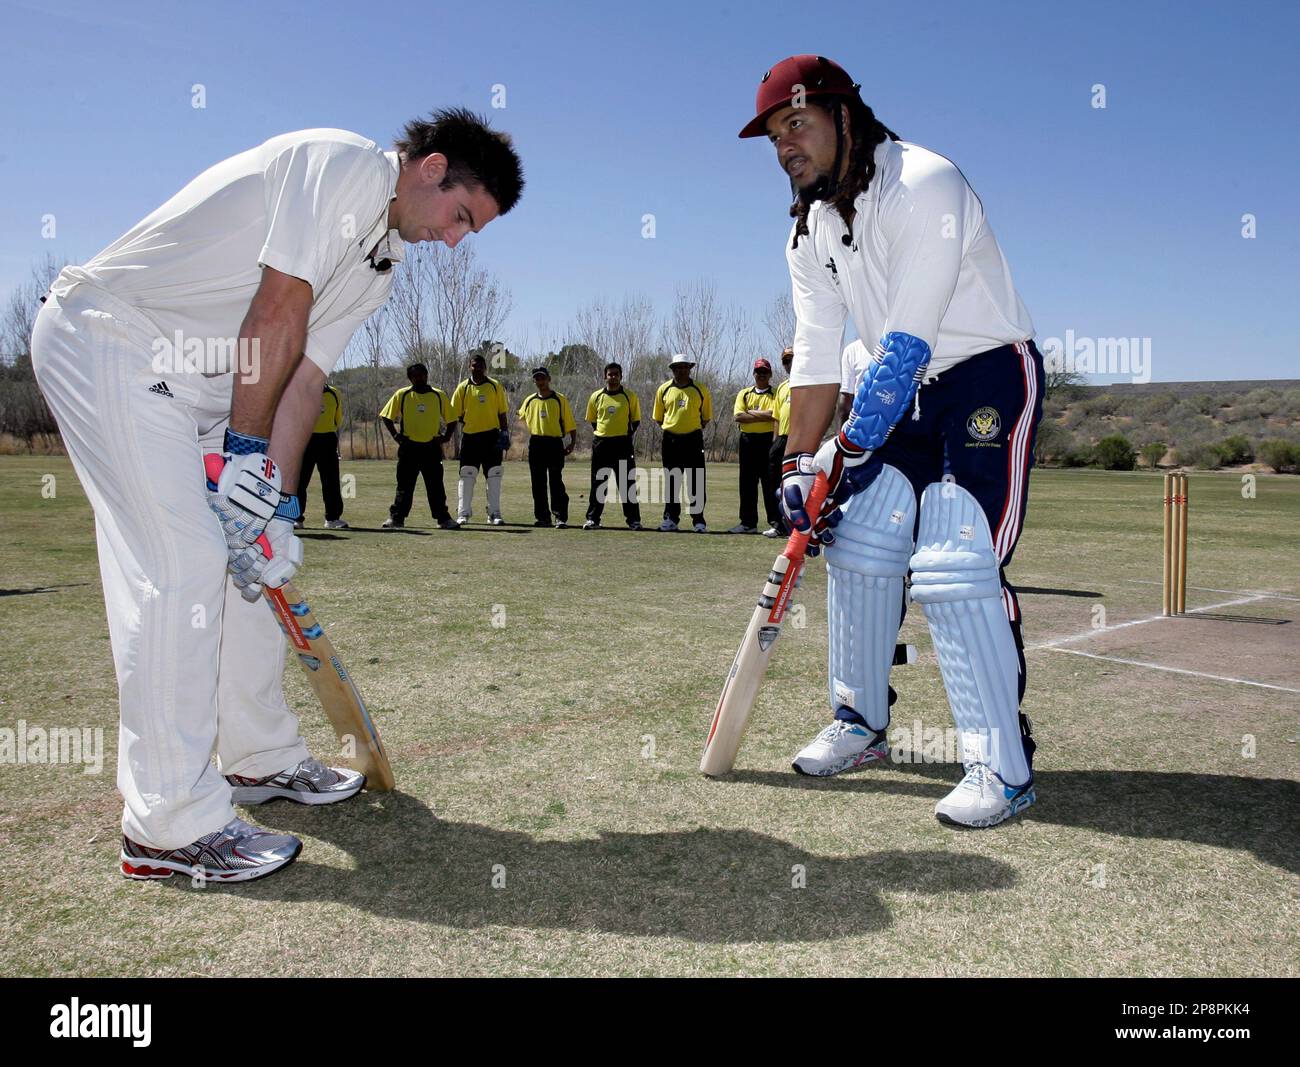 Australian cricketer Shaun Marsh, left, instructs Los Angeles Dodgers slugger Manny Ramirez, right, in cricket batting technique Wednesday, March 18, 2009, at the Arizona Cricket Clubs pitch in Gilbert, Ariz